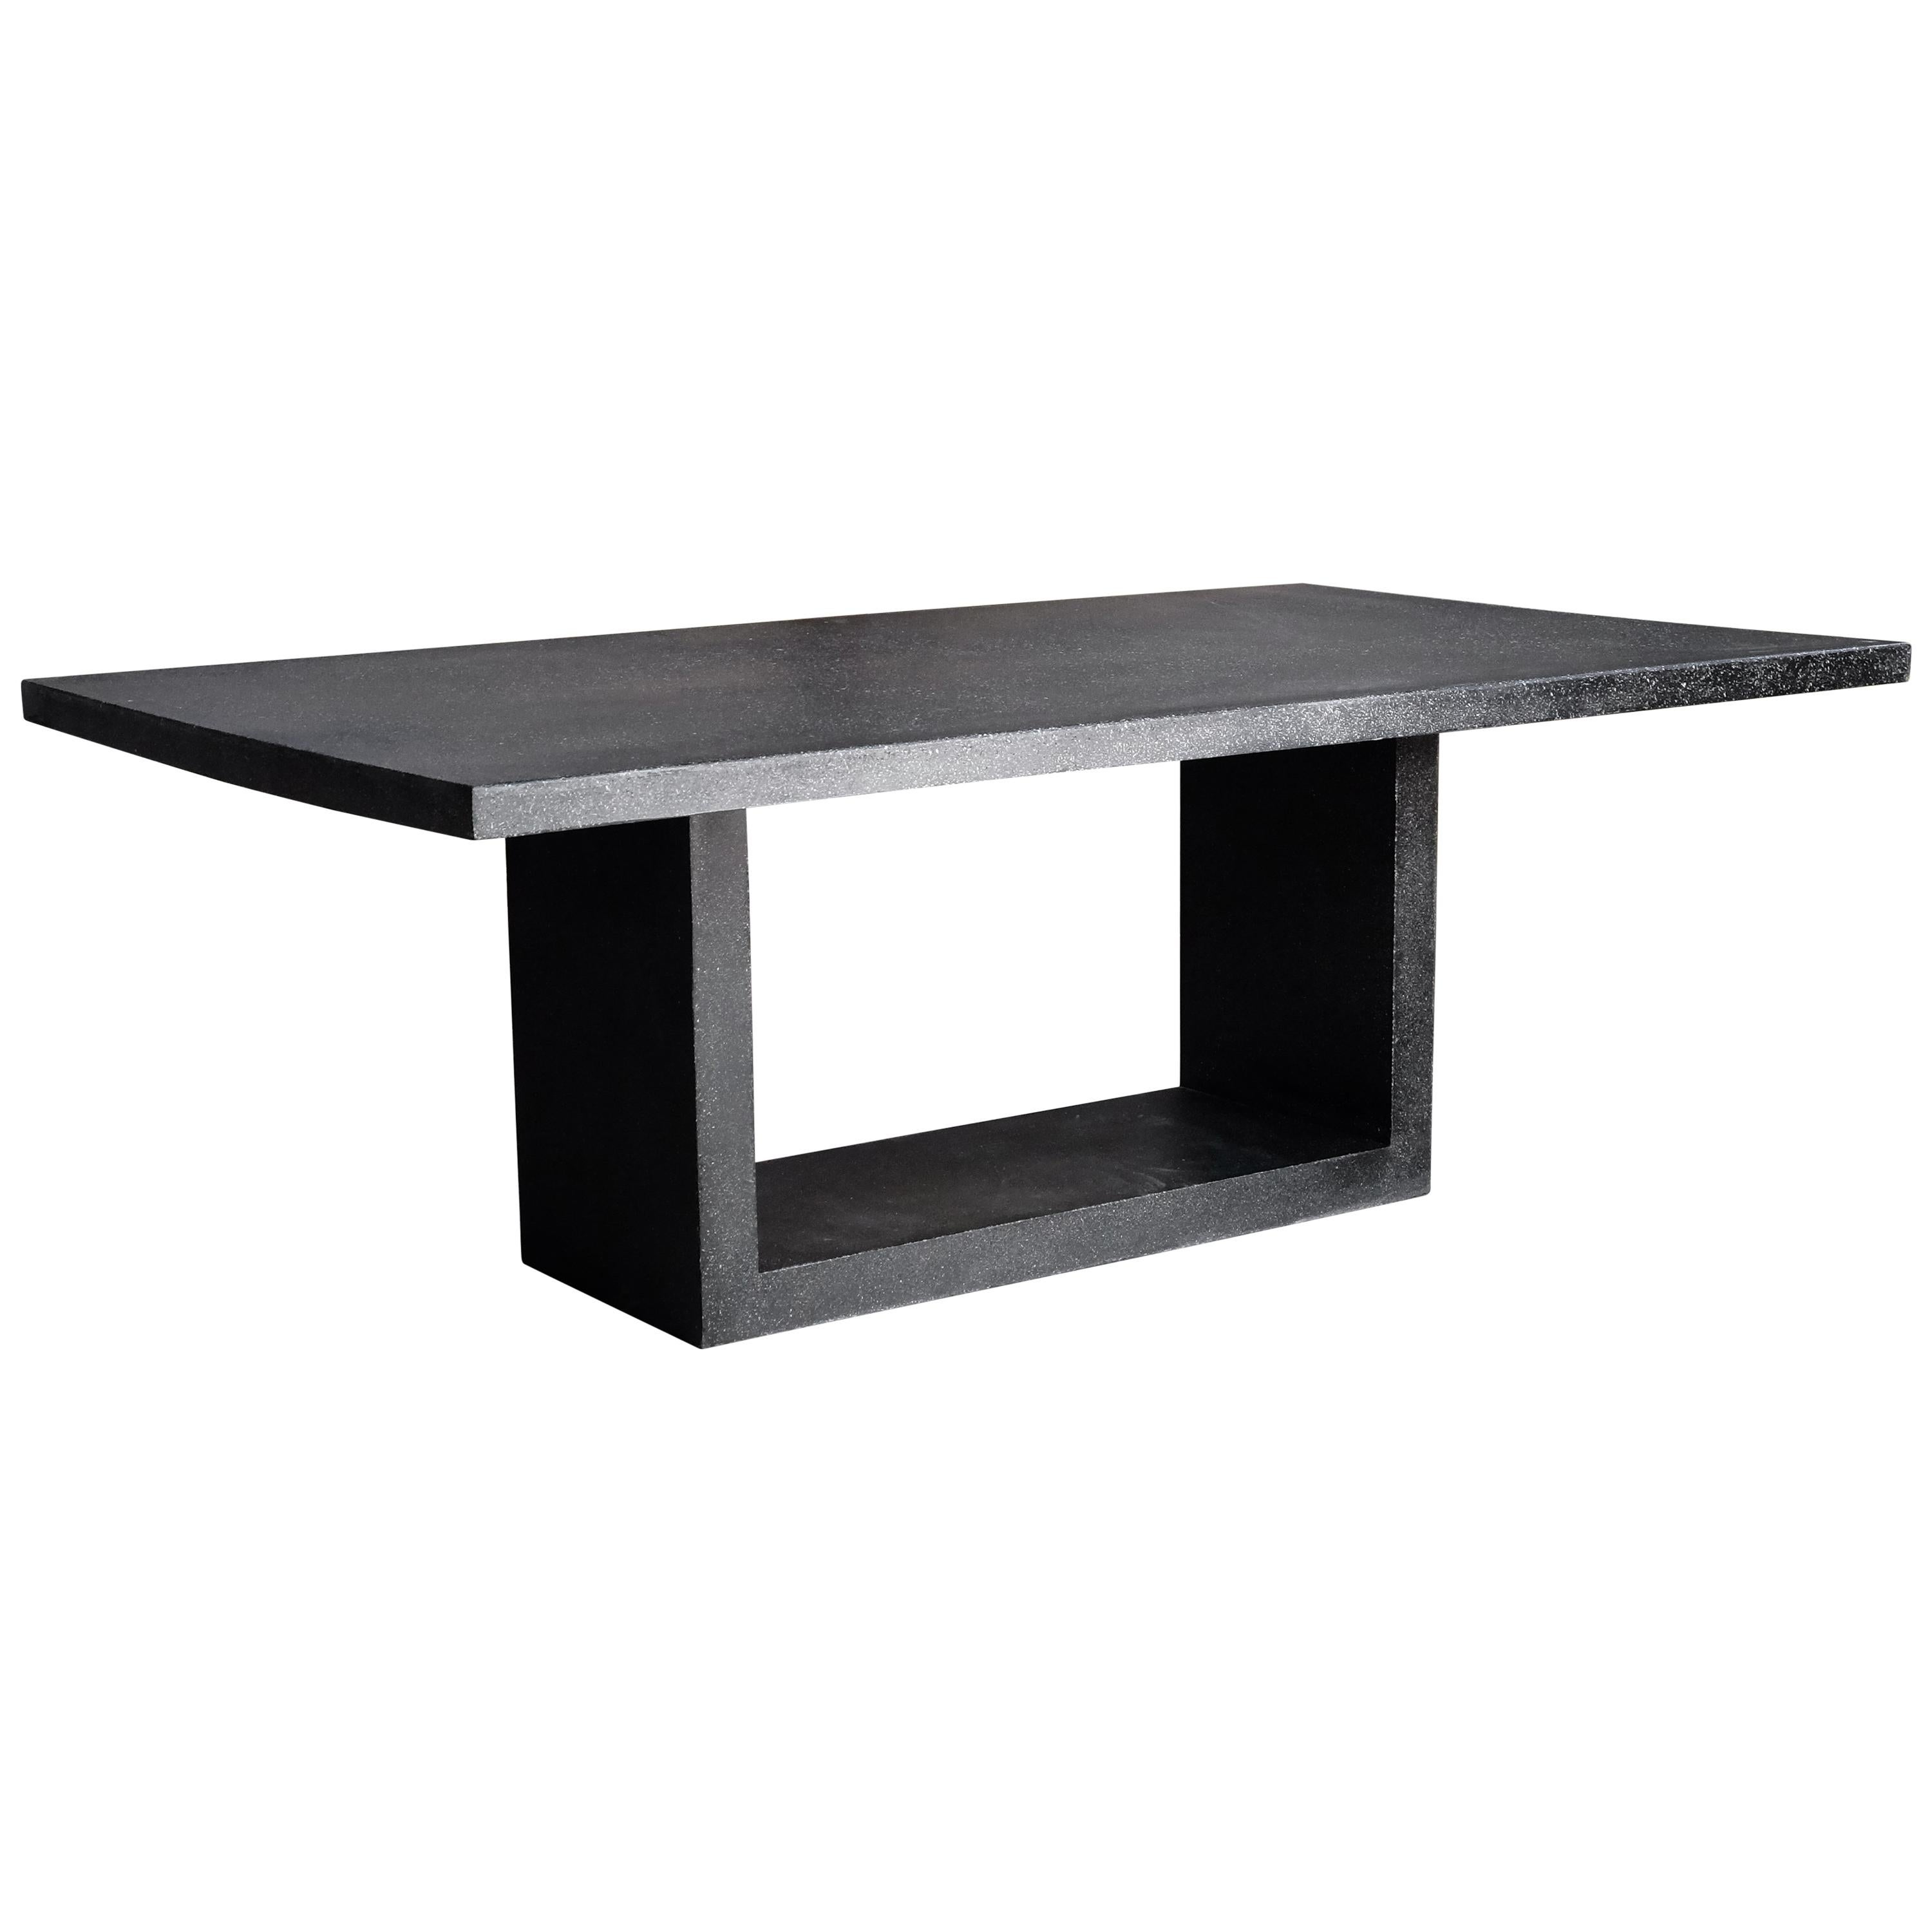 Cast Resin 'Apertura' Dining Table, Coal Stone Finish by Zachary A. Design For Sale